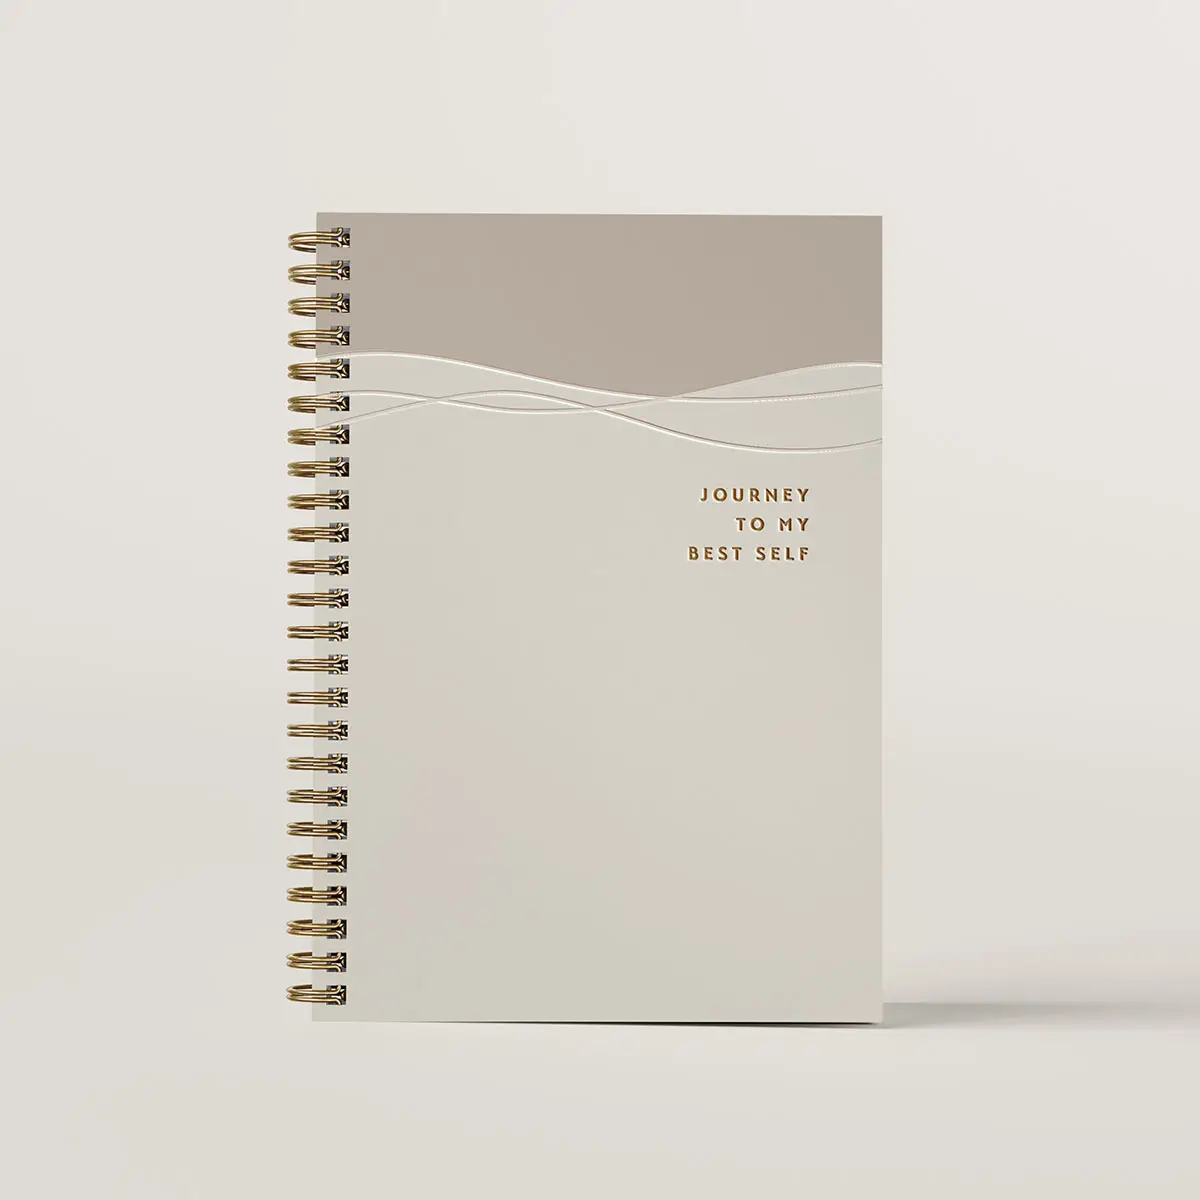 Journal design of Journey to My Best Self. It's beige cover with 2 flowing lines that are debossed, and a smalll debossed title.